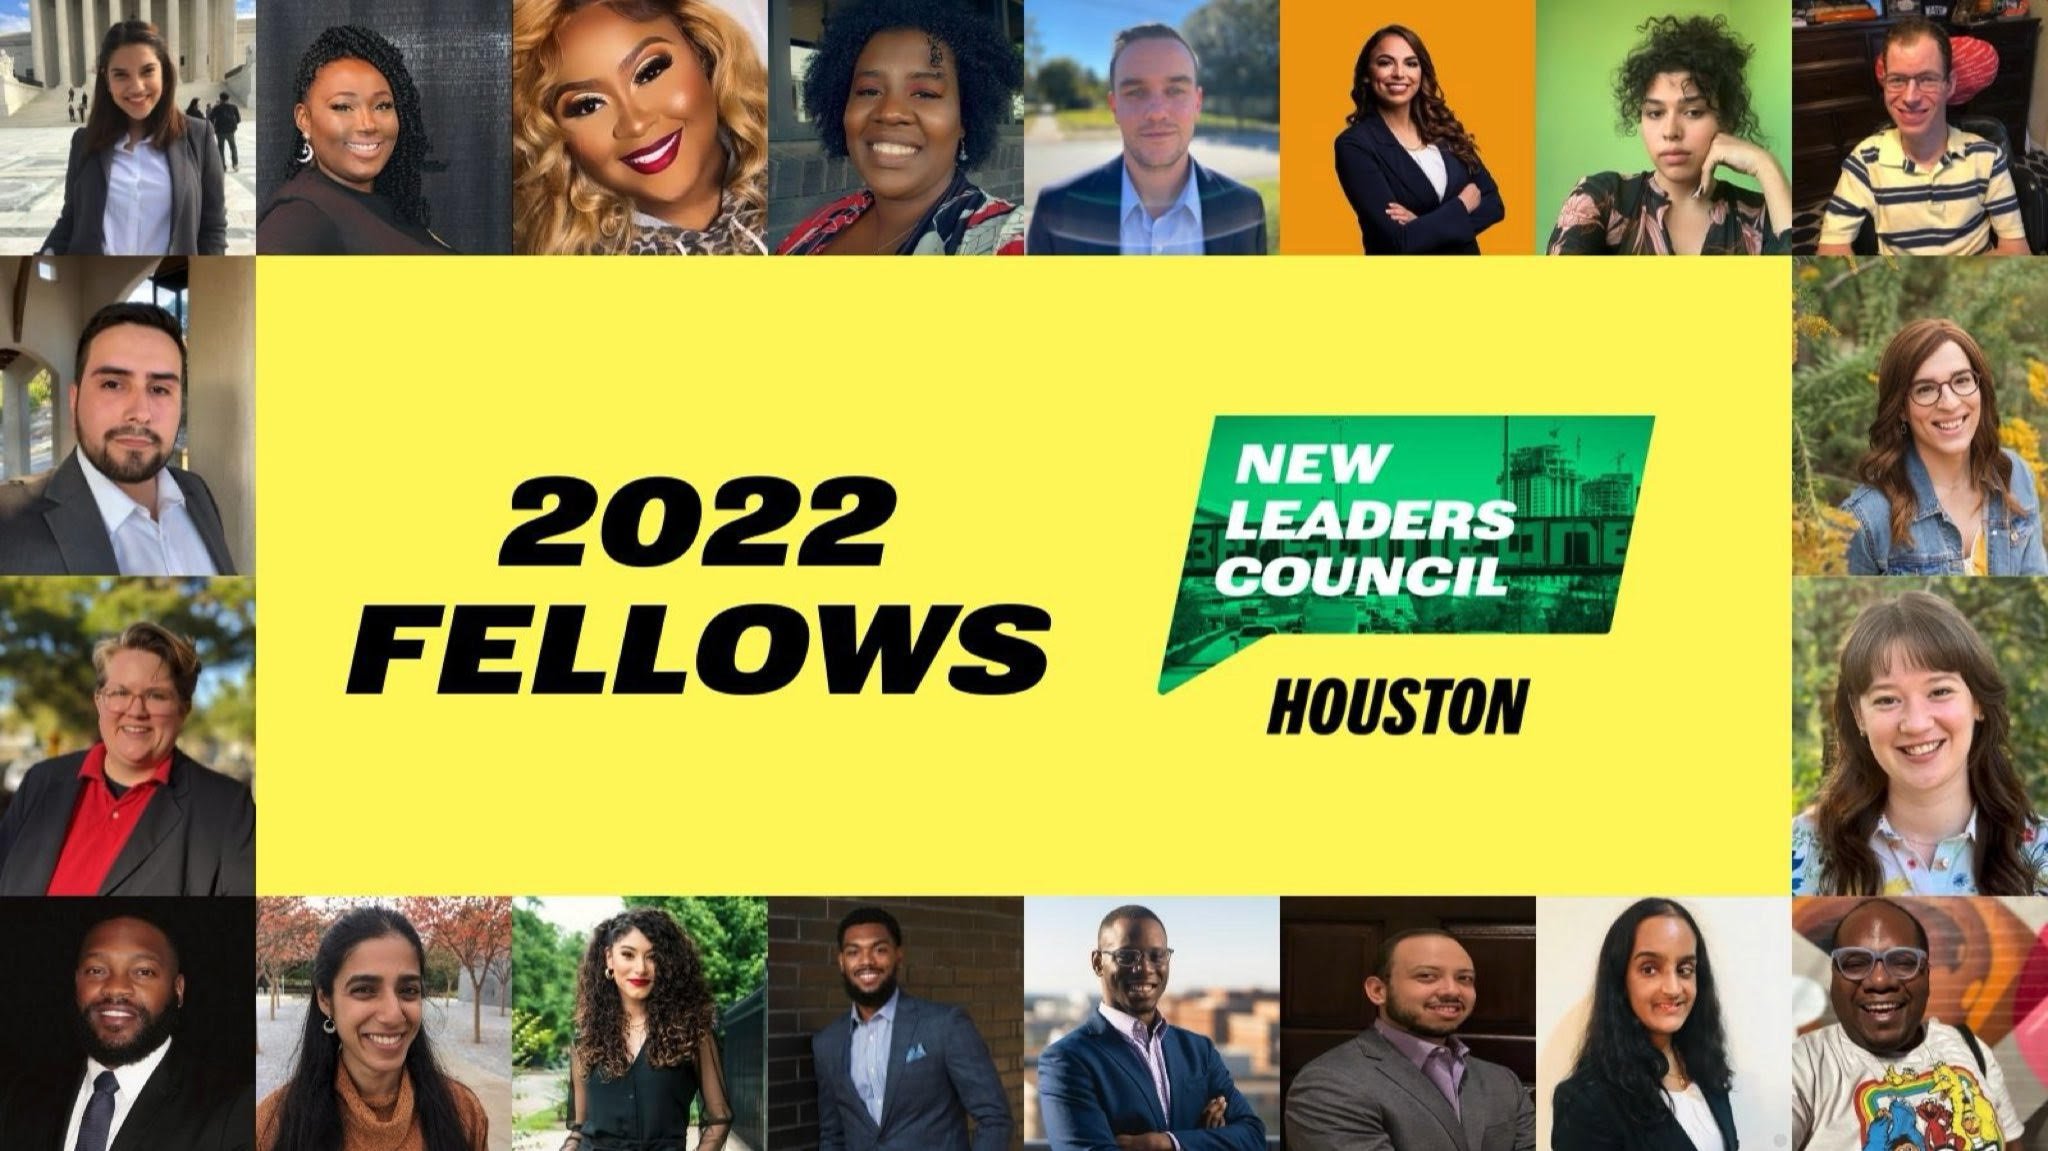 New Leaders Council Houston 2022 Fellow